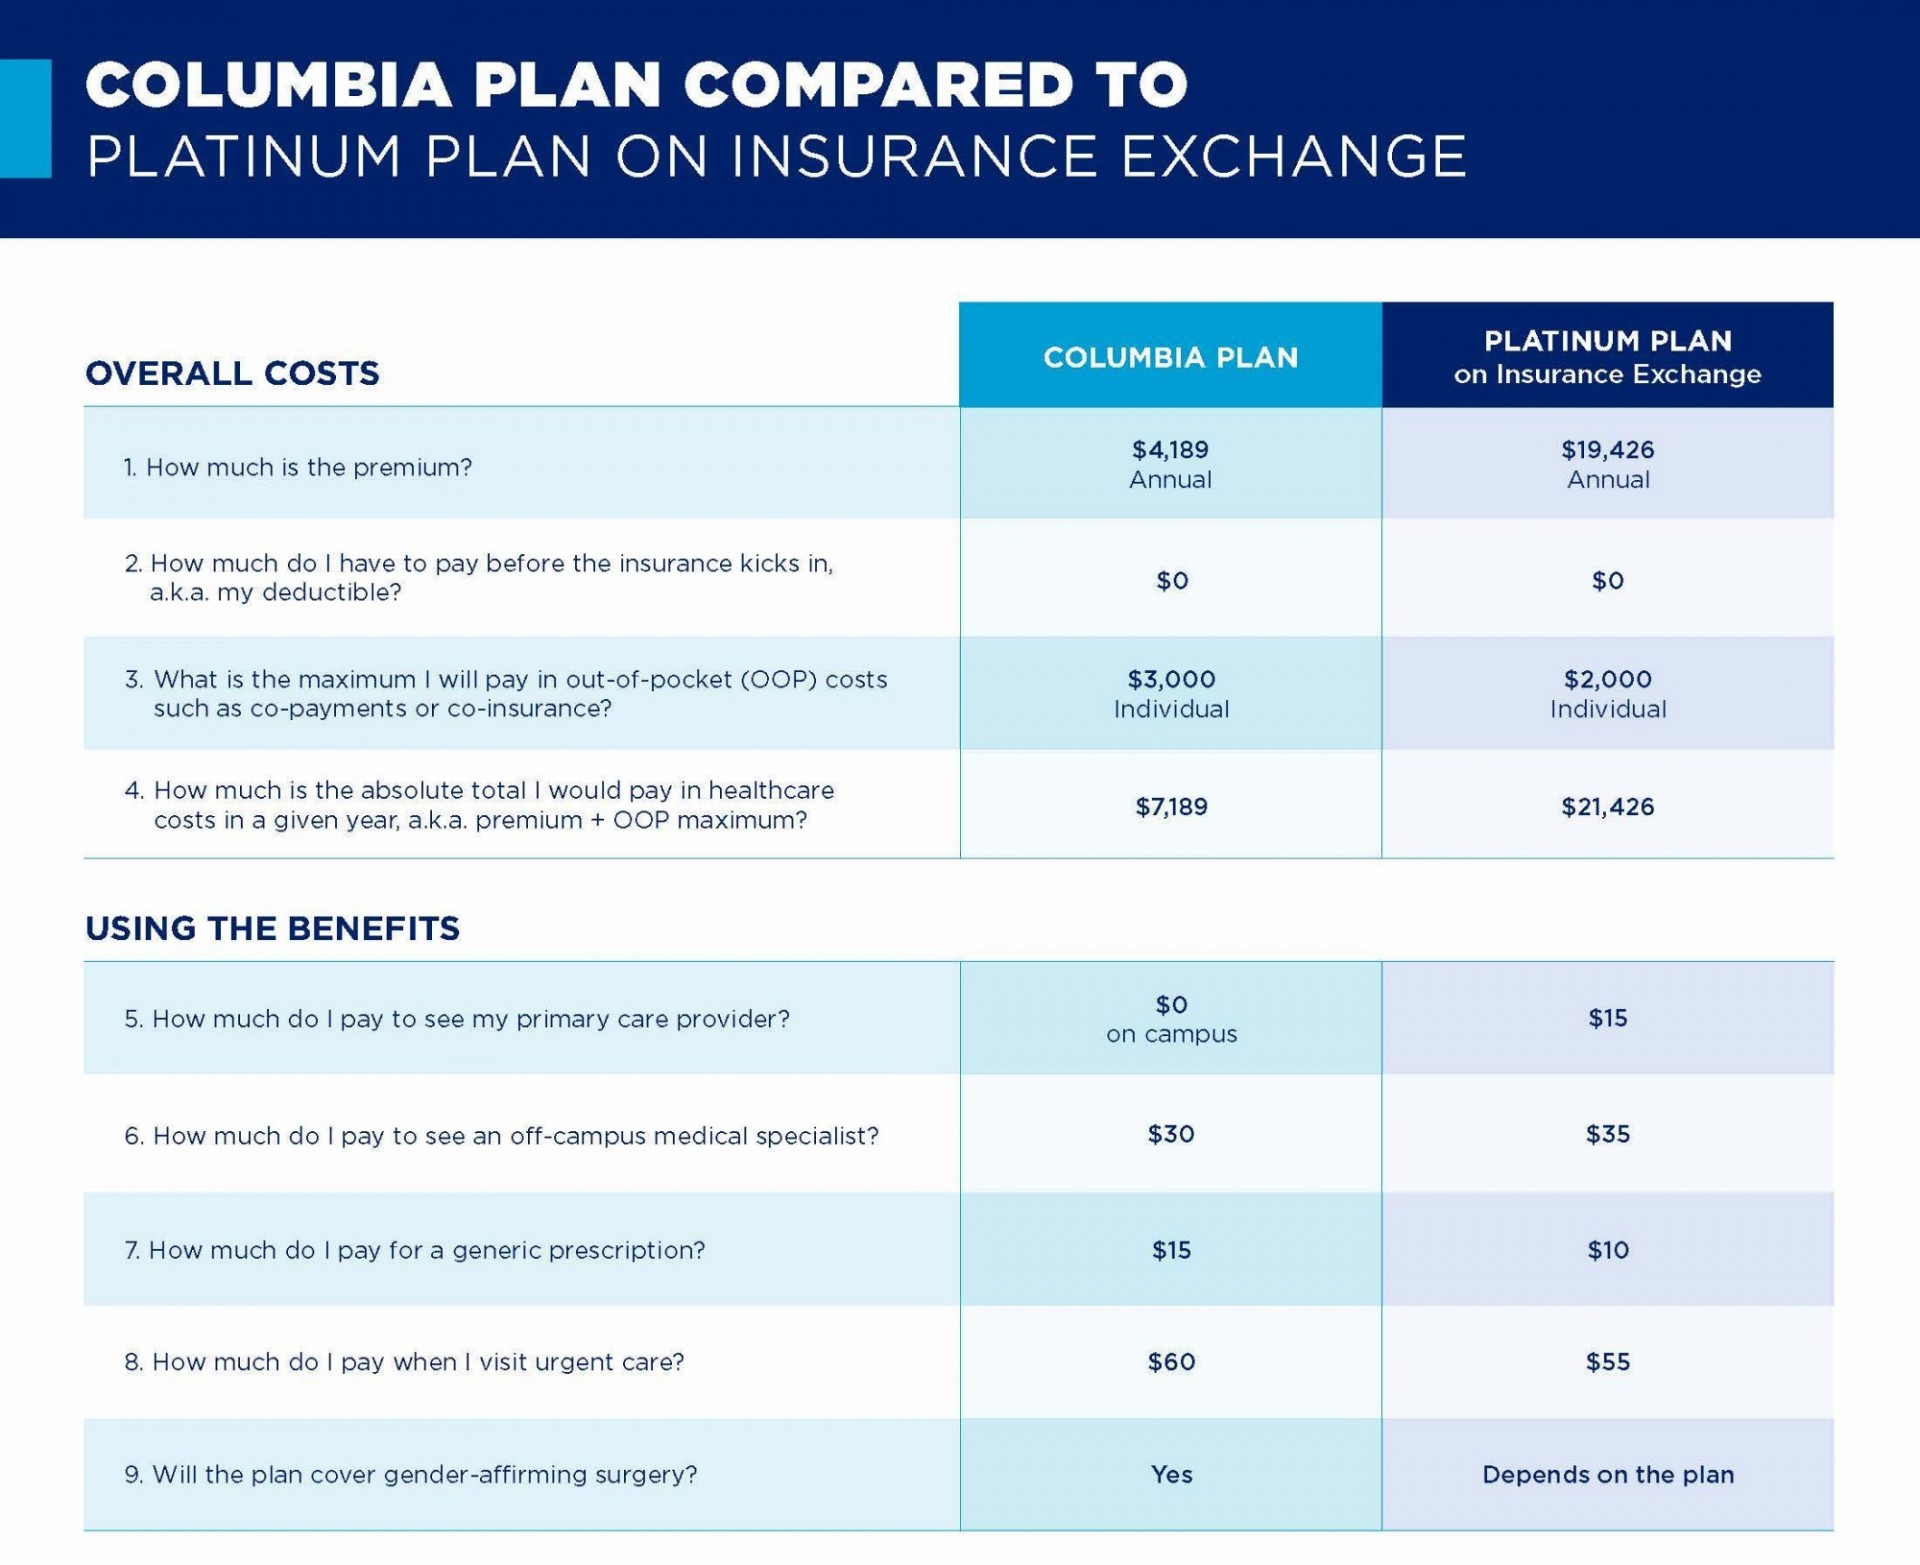 Table demonstrating differences between the cost and benefits of the Columbia Student Health Insurance compared to a platinum plan on the insurance exchange